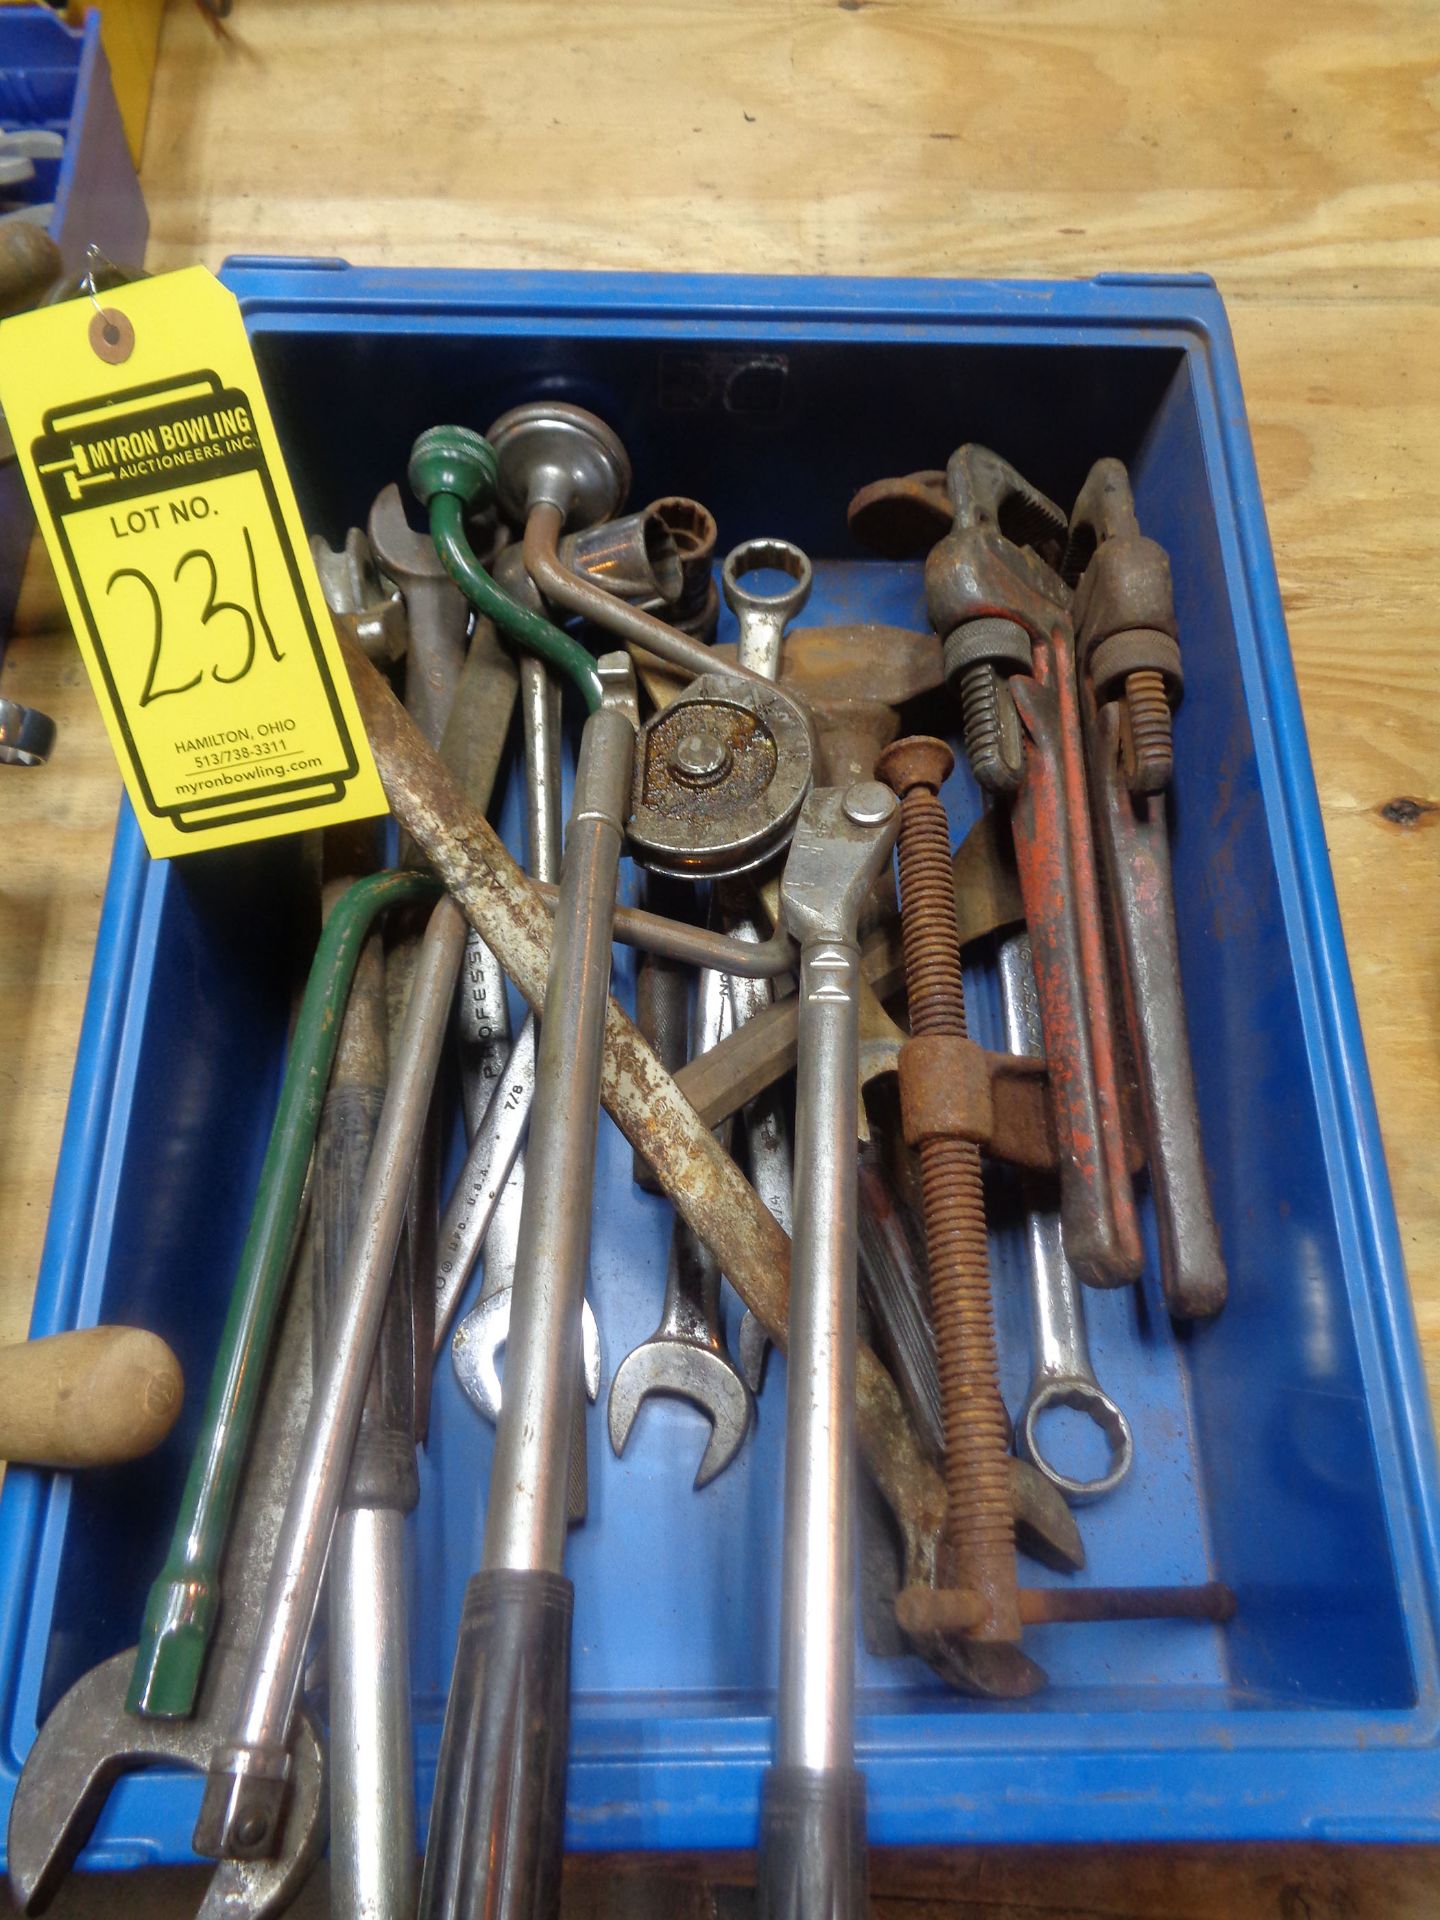 LOT OF ASSORTED HAND TOOLS - WRENCHES, BENDERS, SCREWDRIVERS